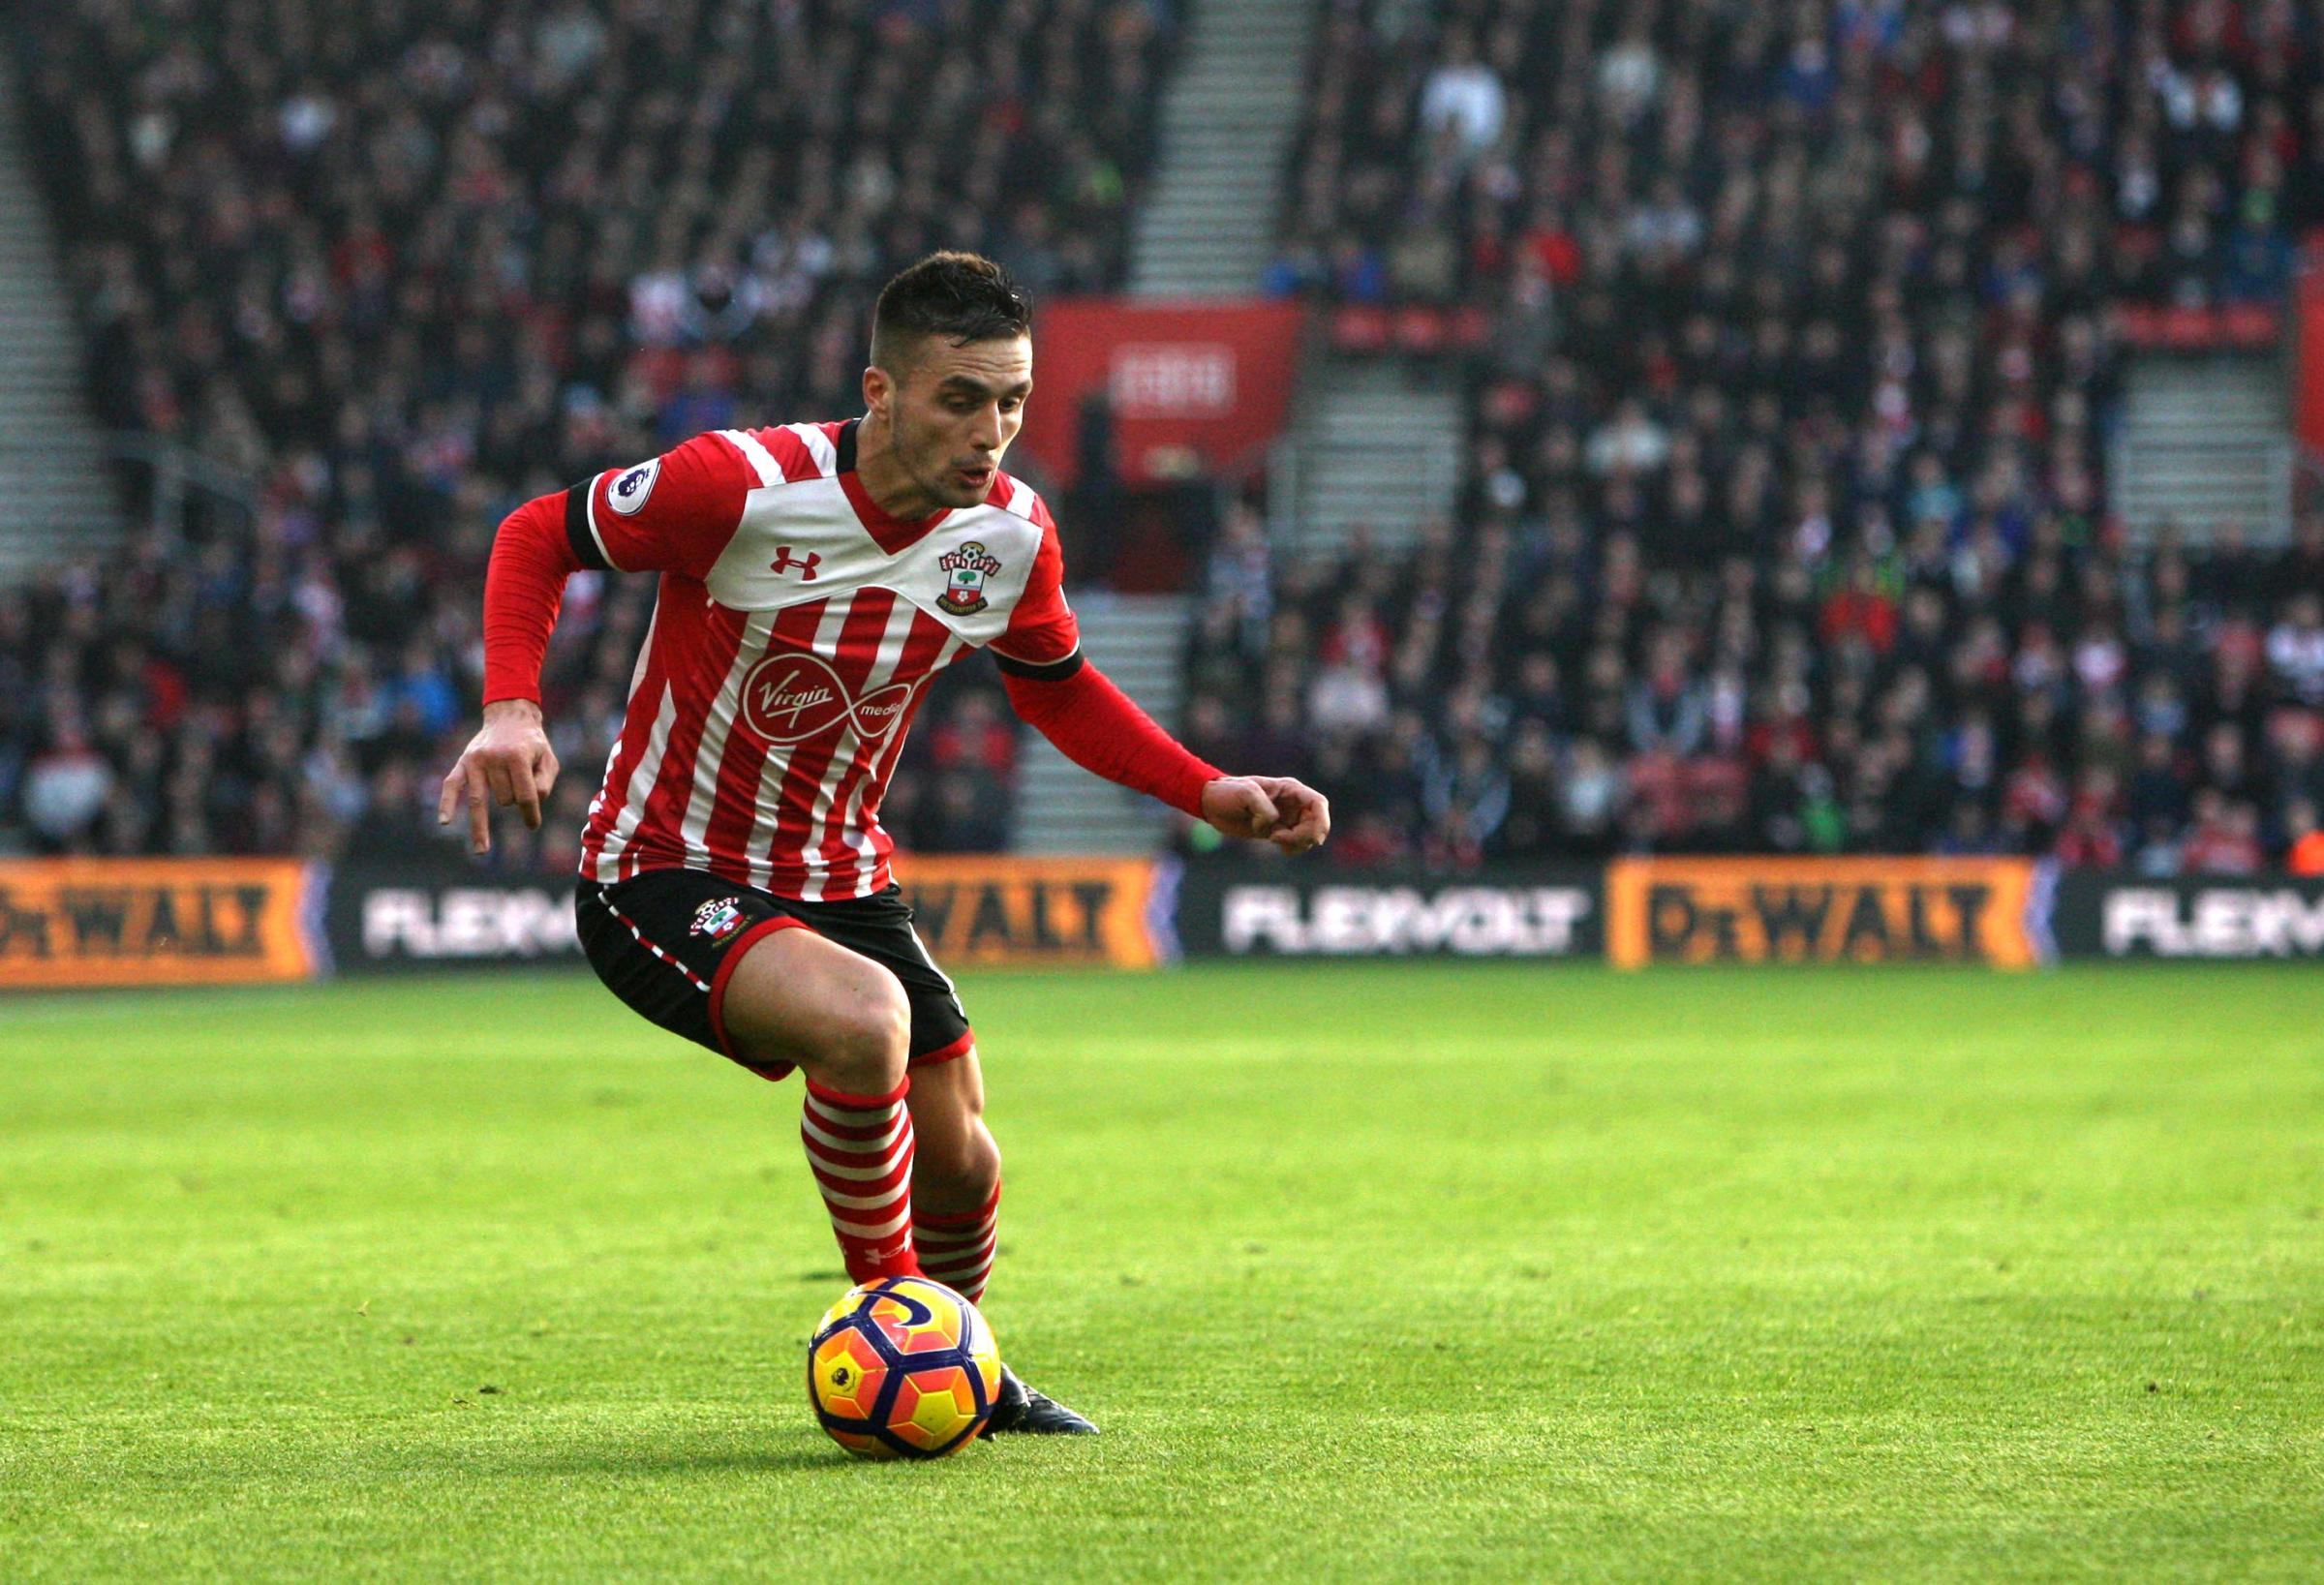 Puel deals with Tadic after comments